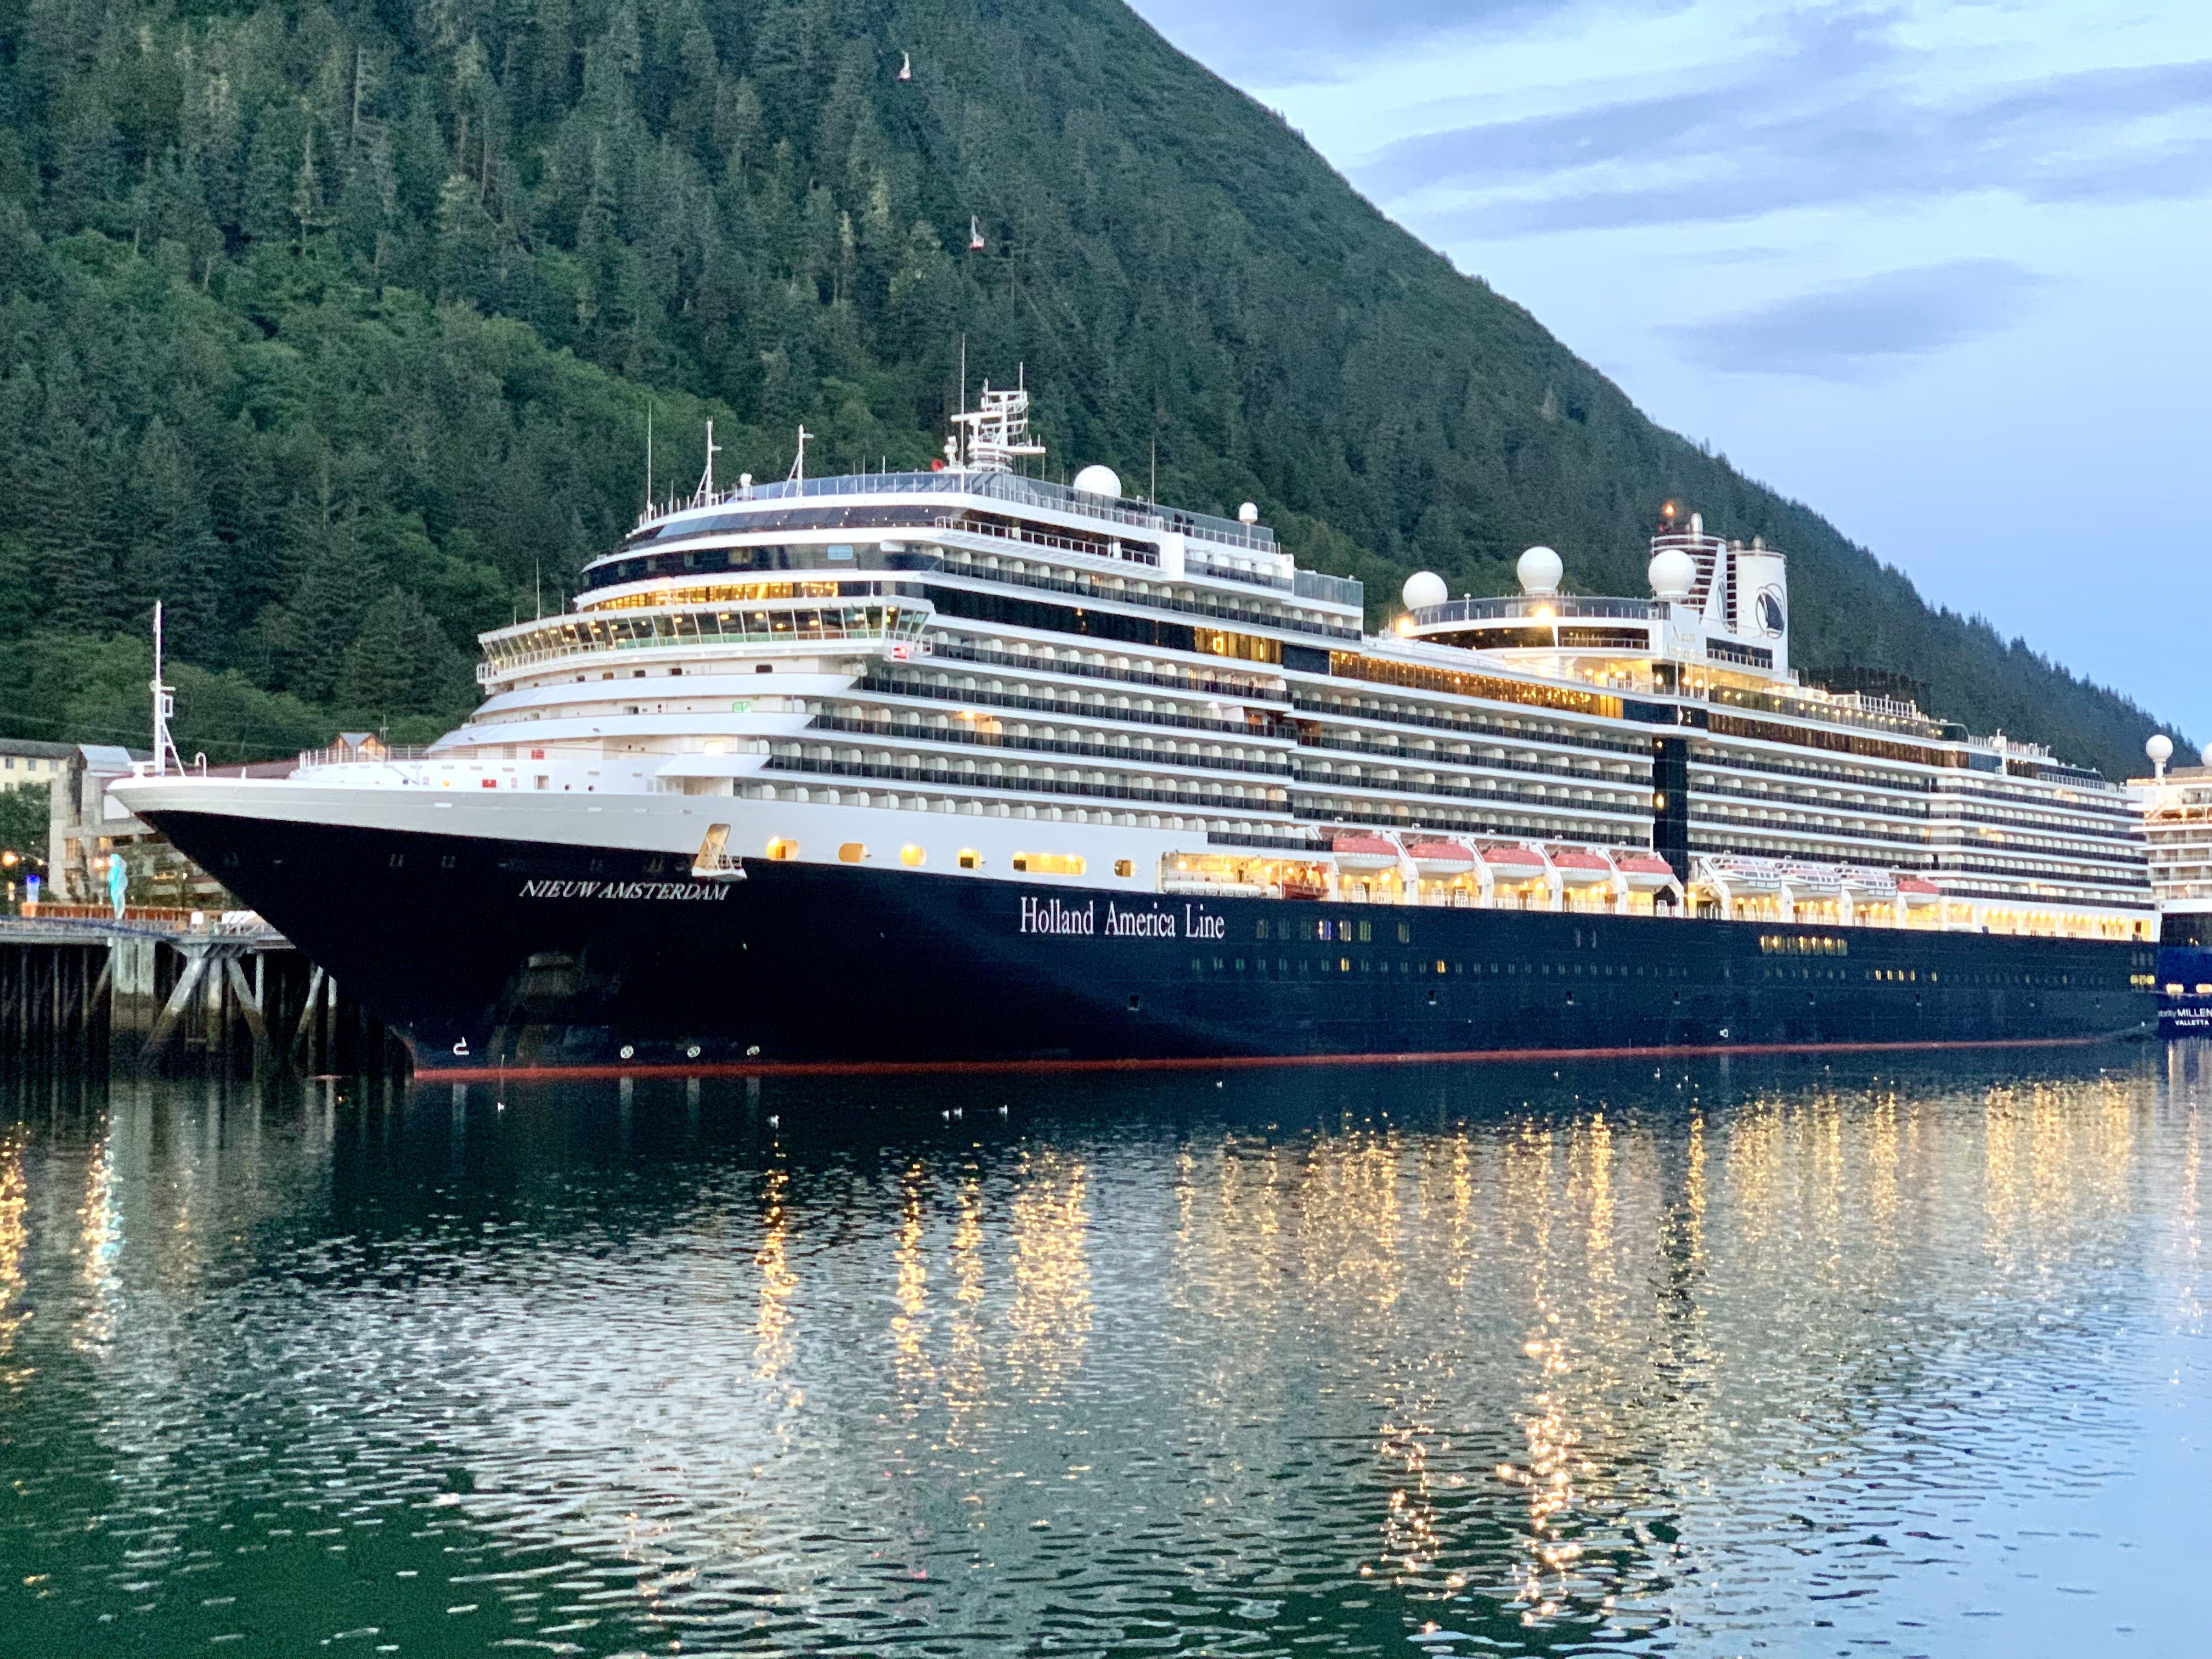 Top Things to Do on Holland America Line in Alaska